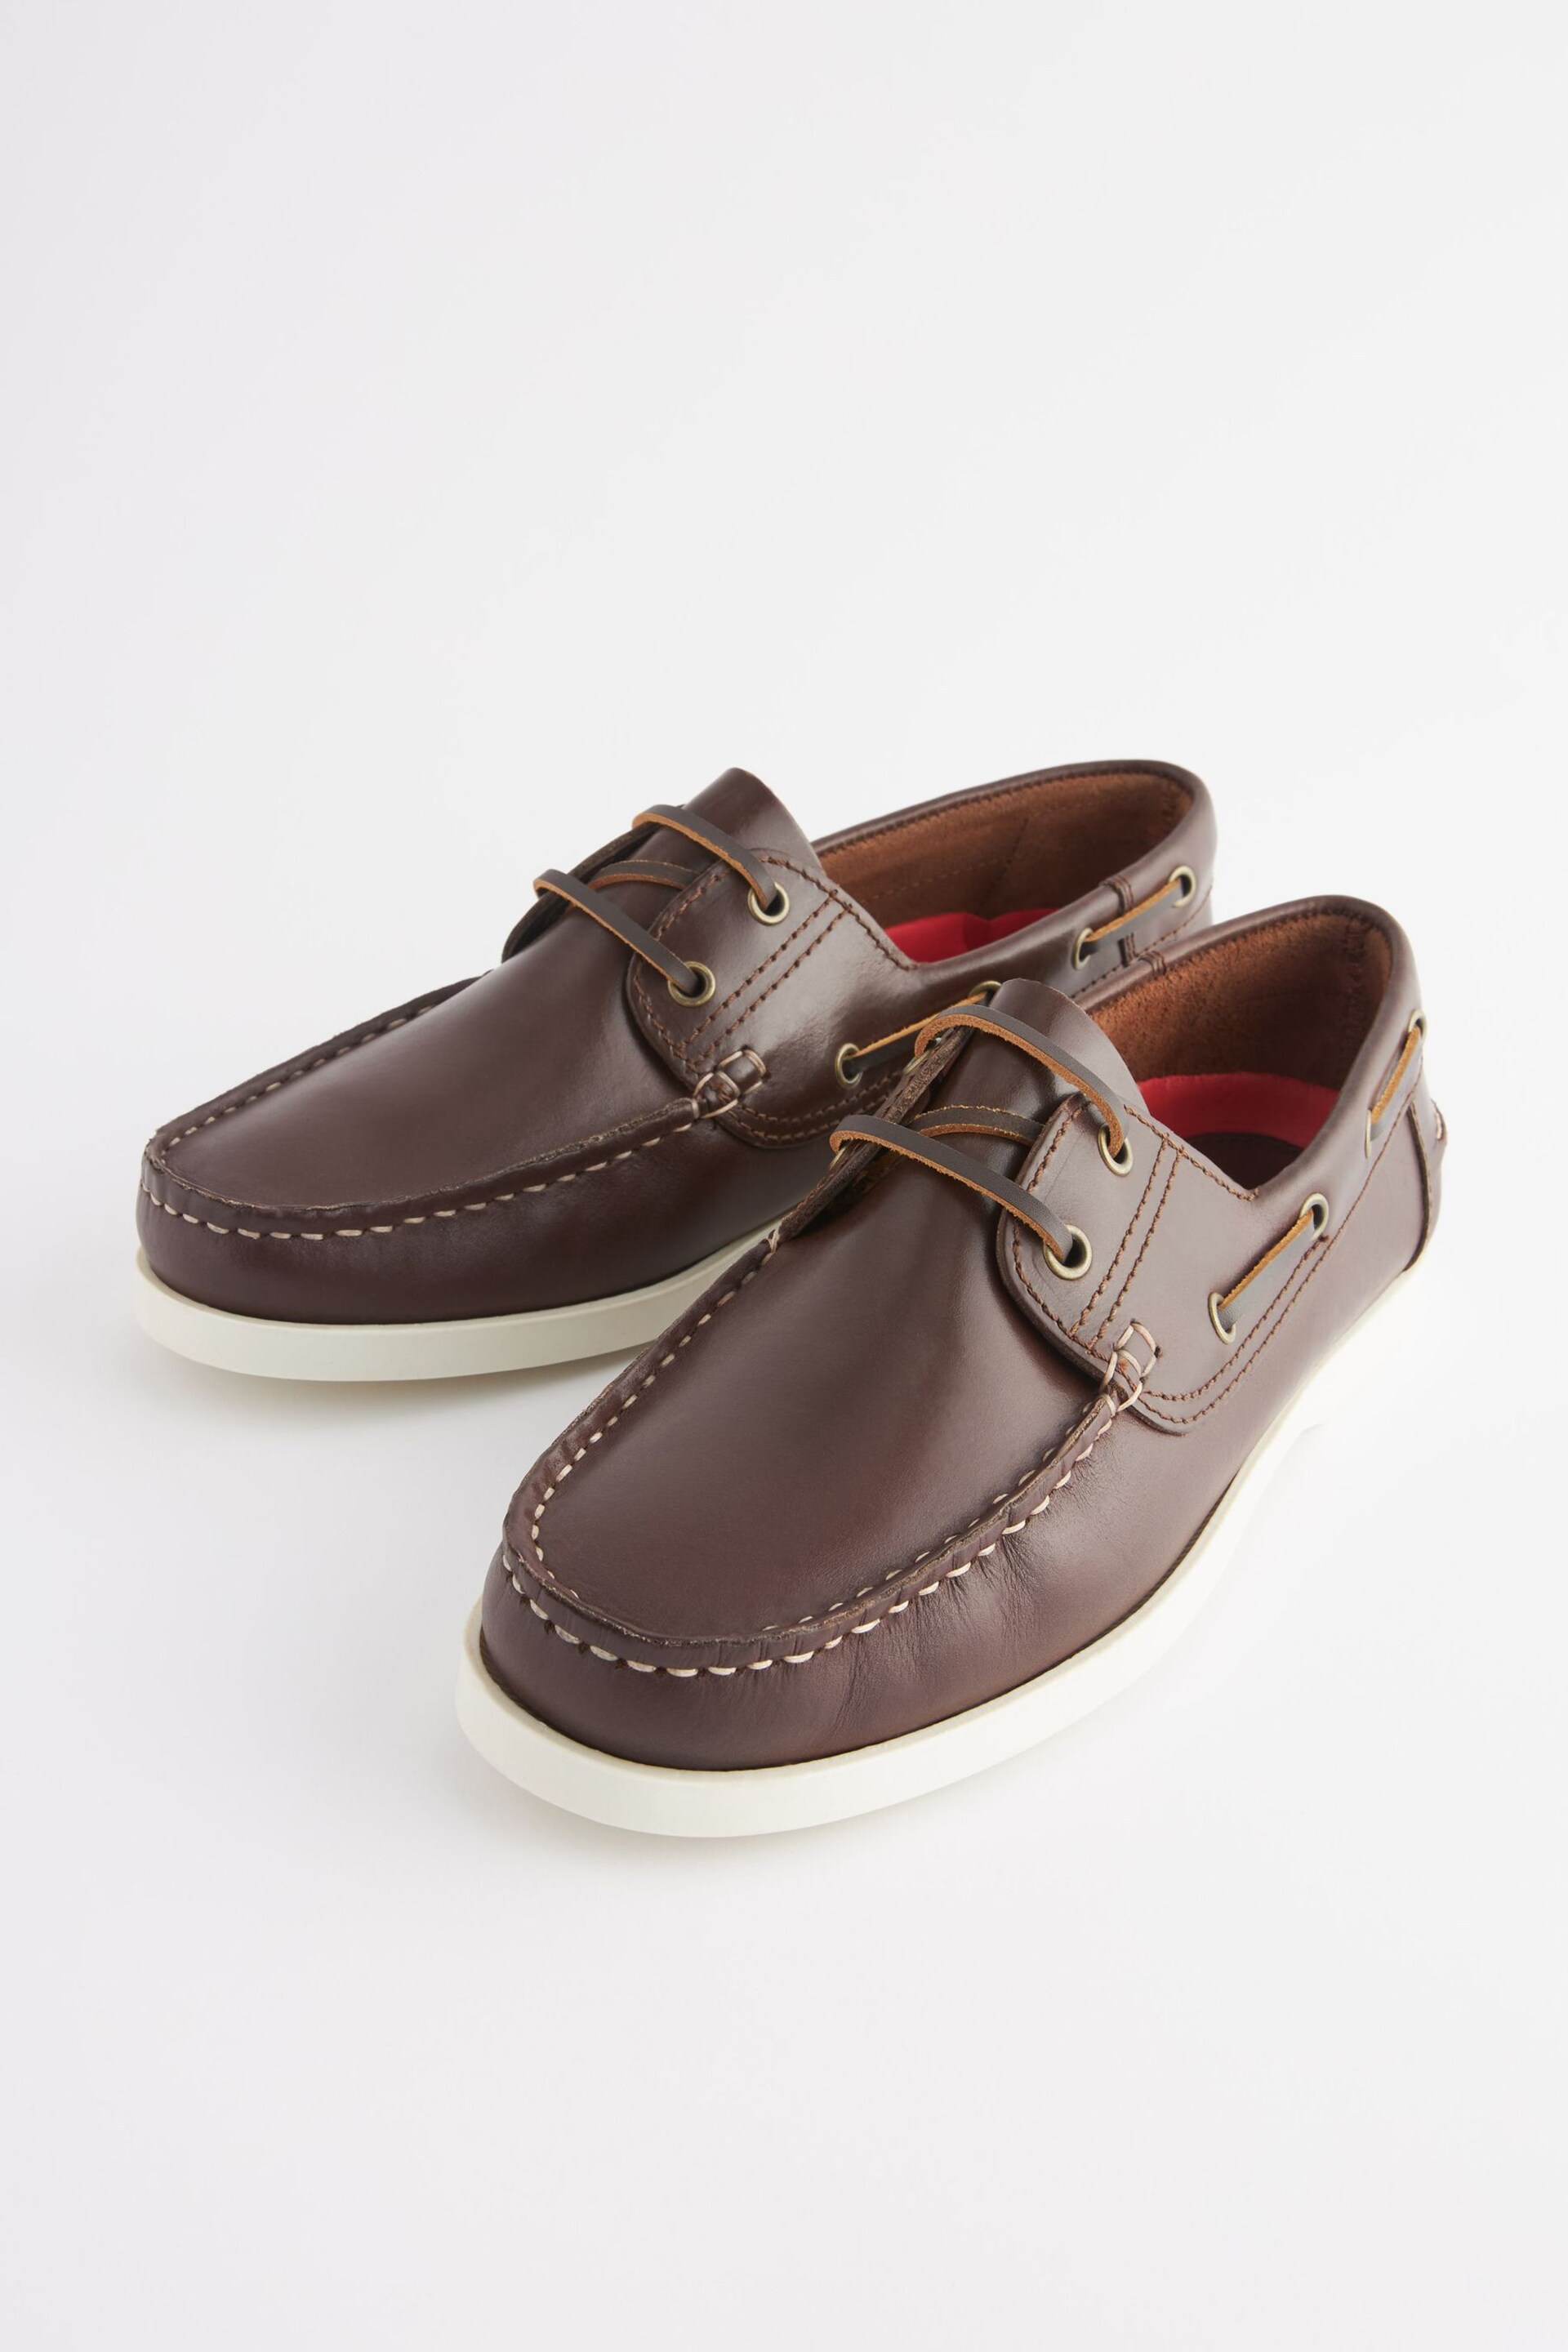 Brown Wide Fit Classic Boat Shoes - Image 4 of 6